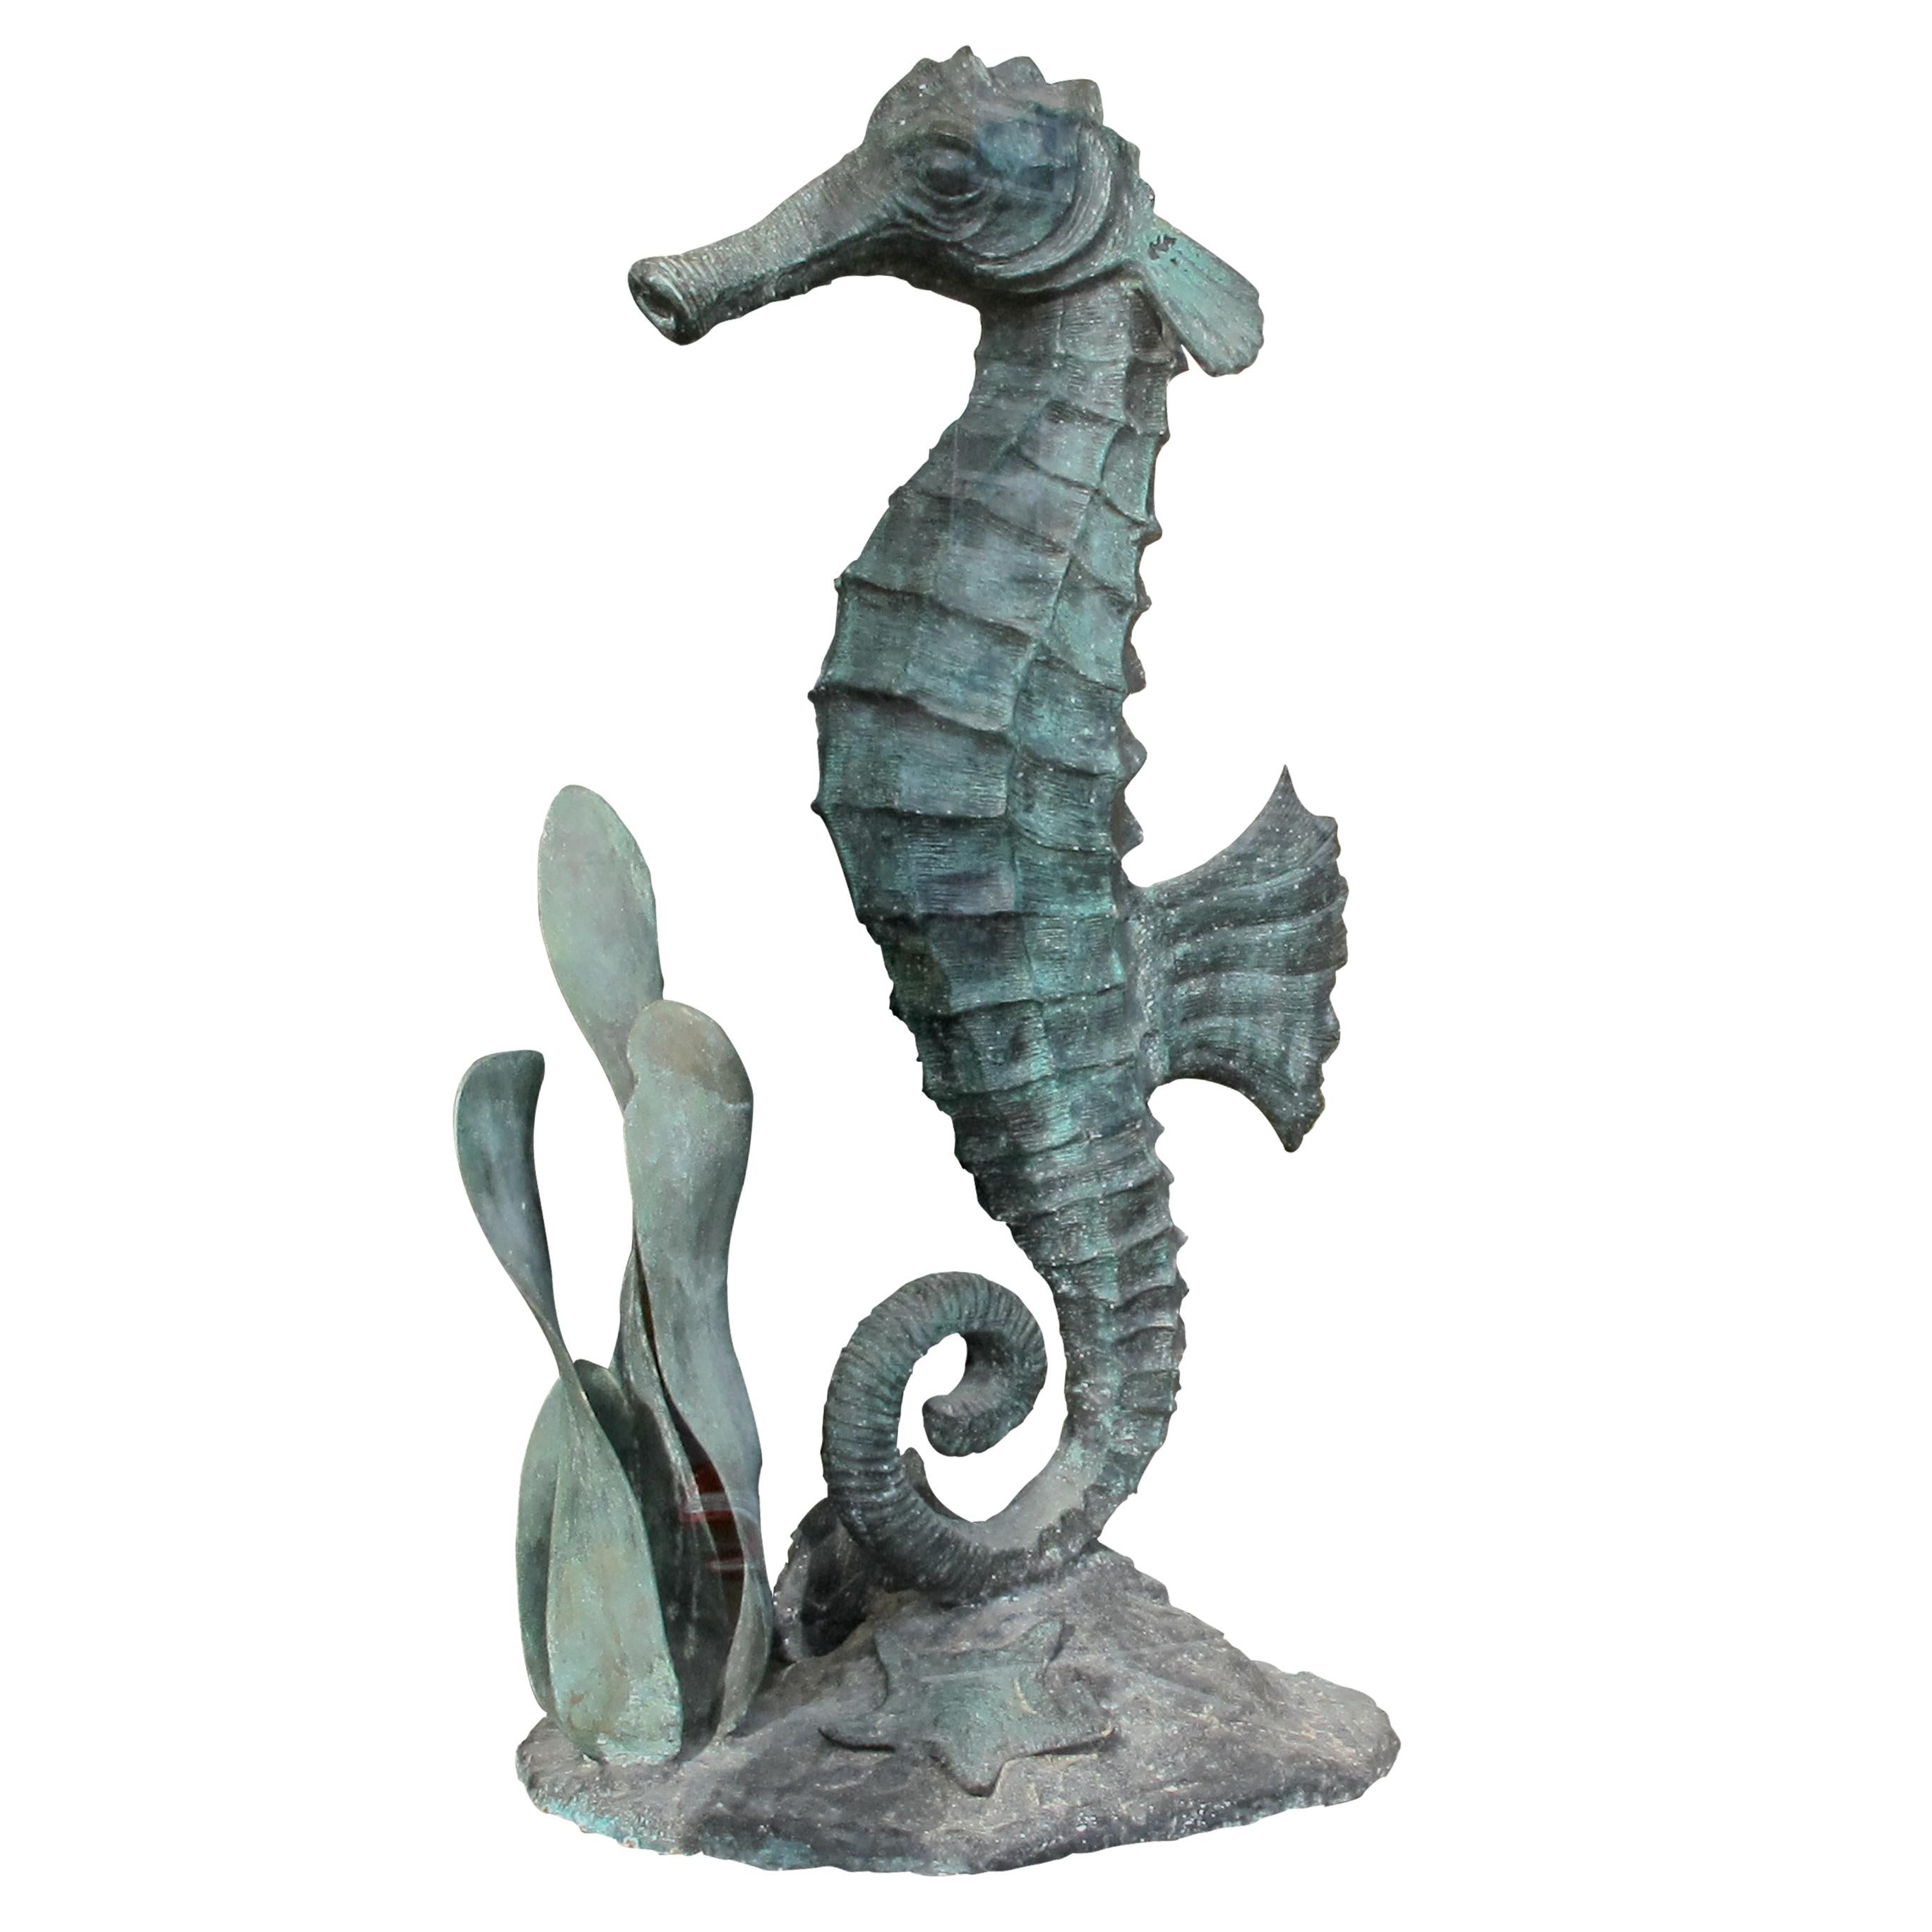 Unique and elegant French highly decorative large bronze sculpture from the Art Deco period. The bronze sculpture represents a scene of a hippocampus standing upright on a sea bed decorated with tall seaweed, two fish and starfish. The sculpture has